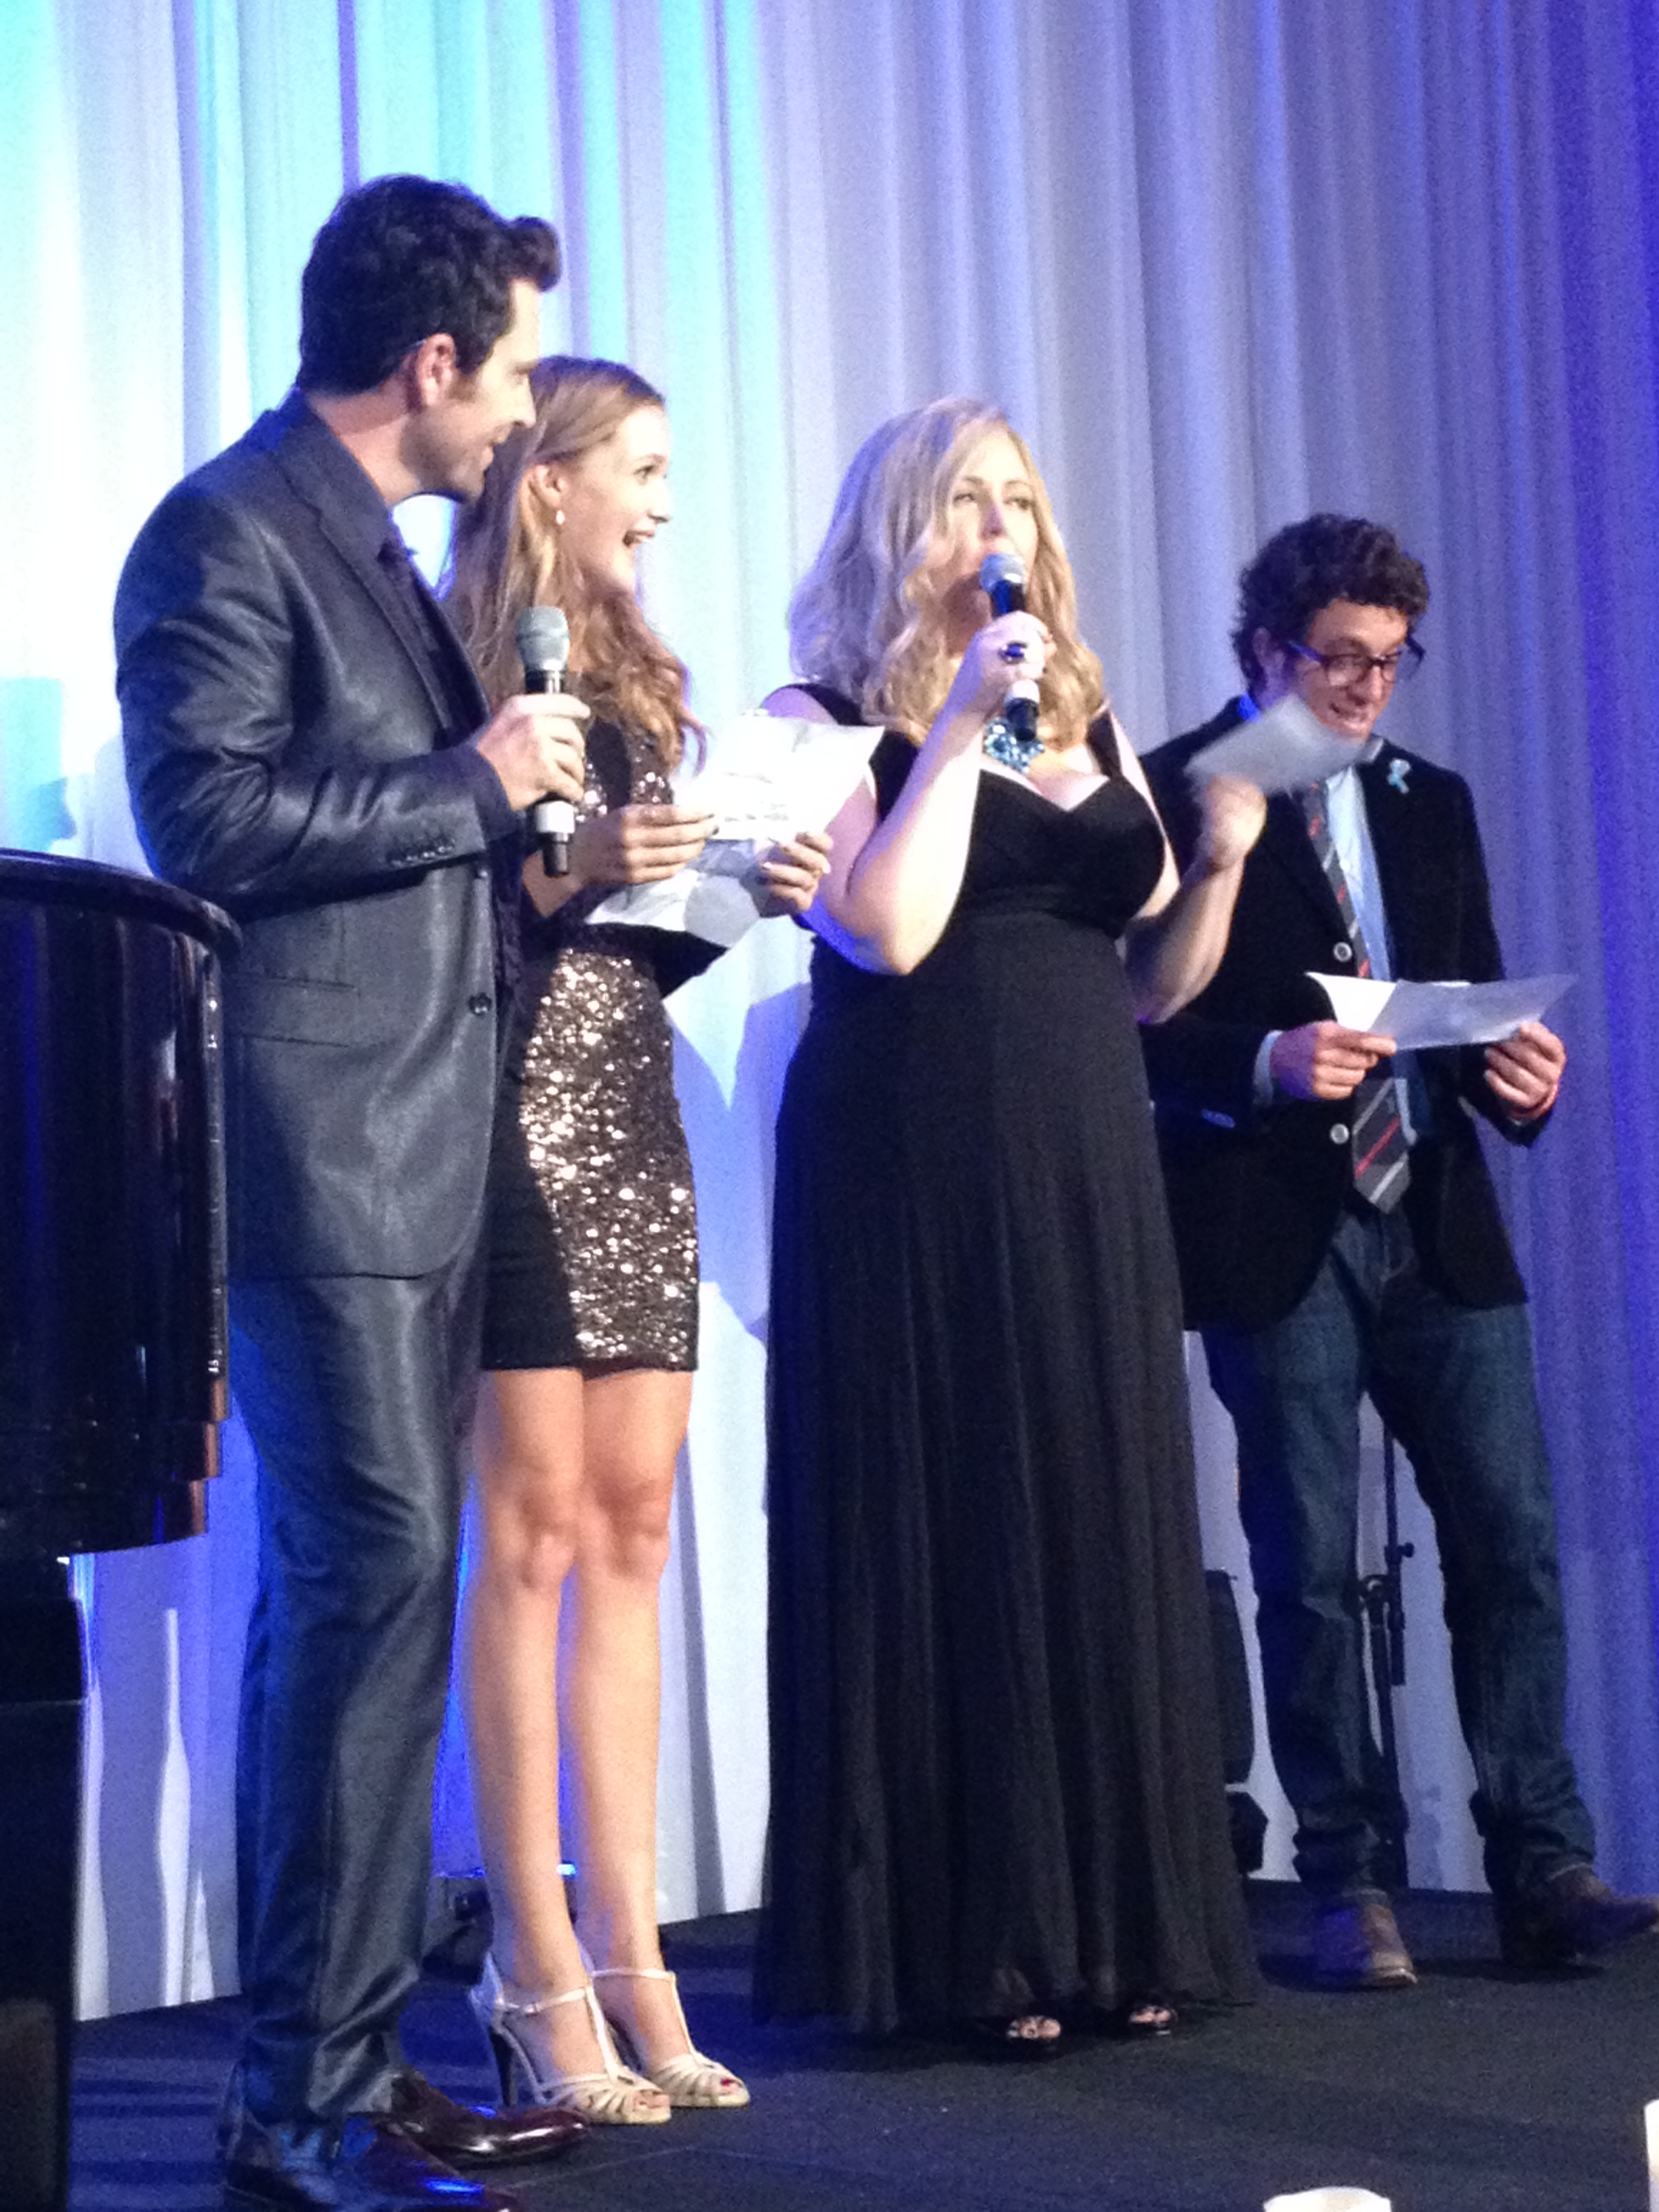 Chris Mann, Gracie Van Brunt, Katrina Parker and Elliot Yamin (Left to Right) Performing at the Tribute to Champions of Hope